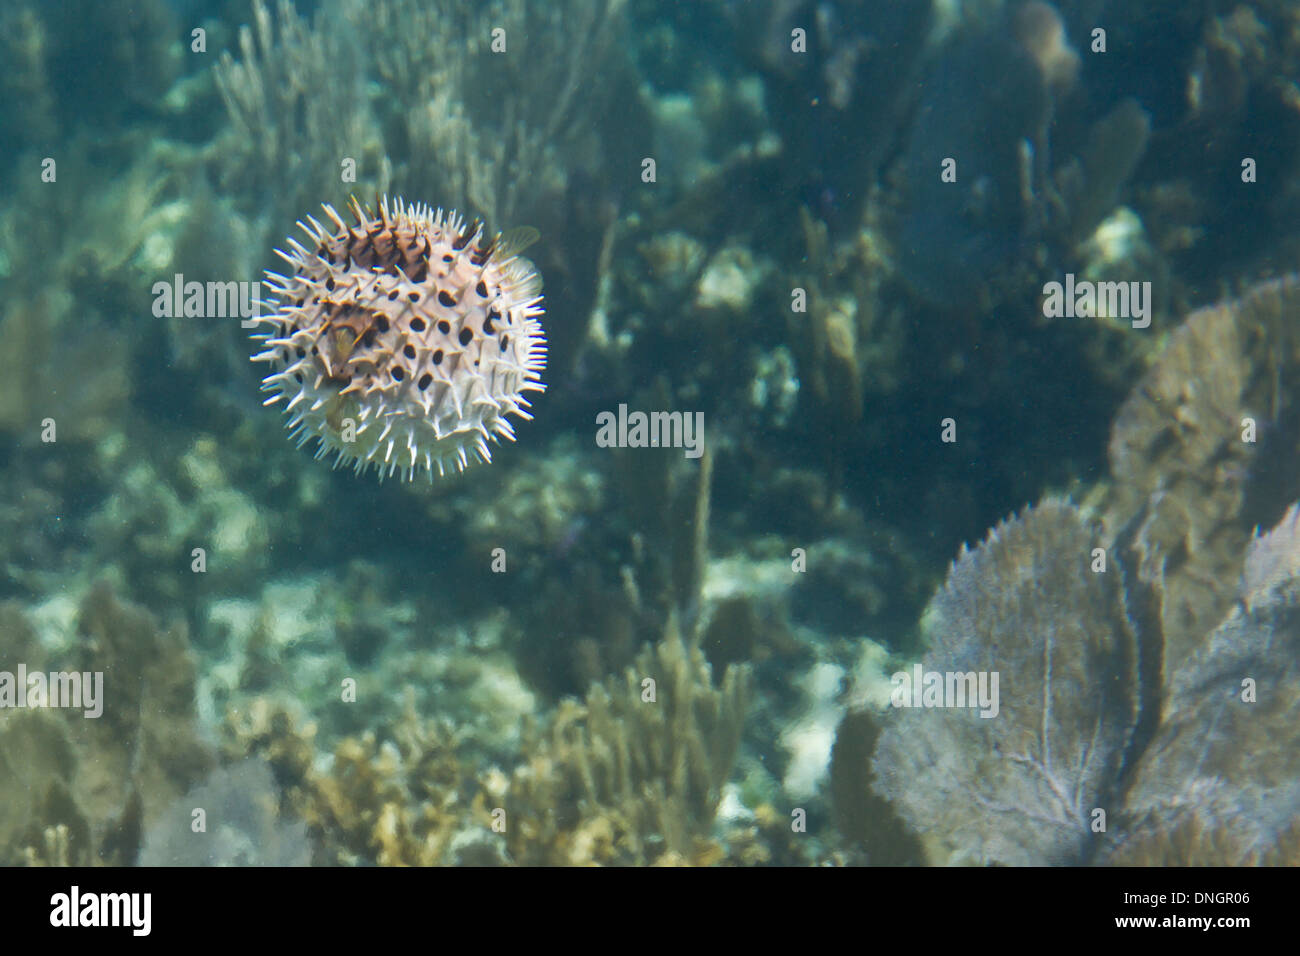 underwater close up of a puffer fish of the coast of Belize Stock Photo